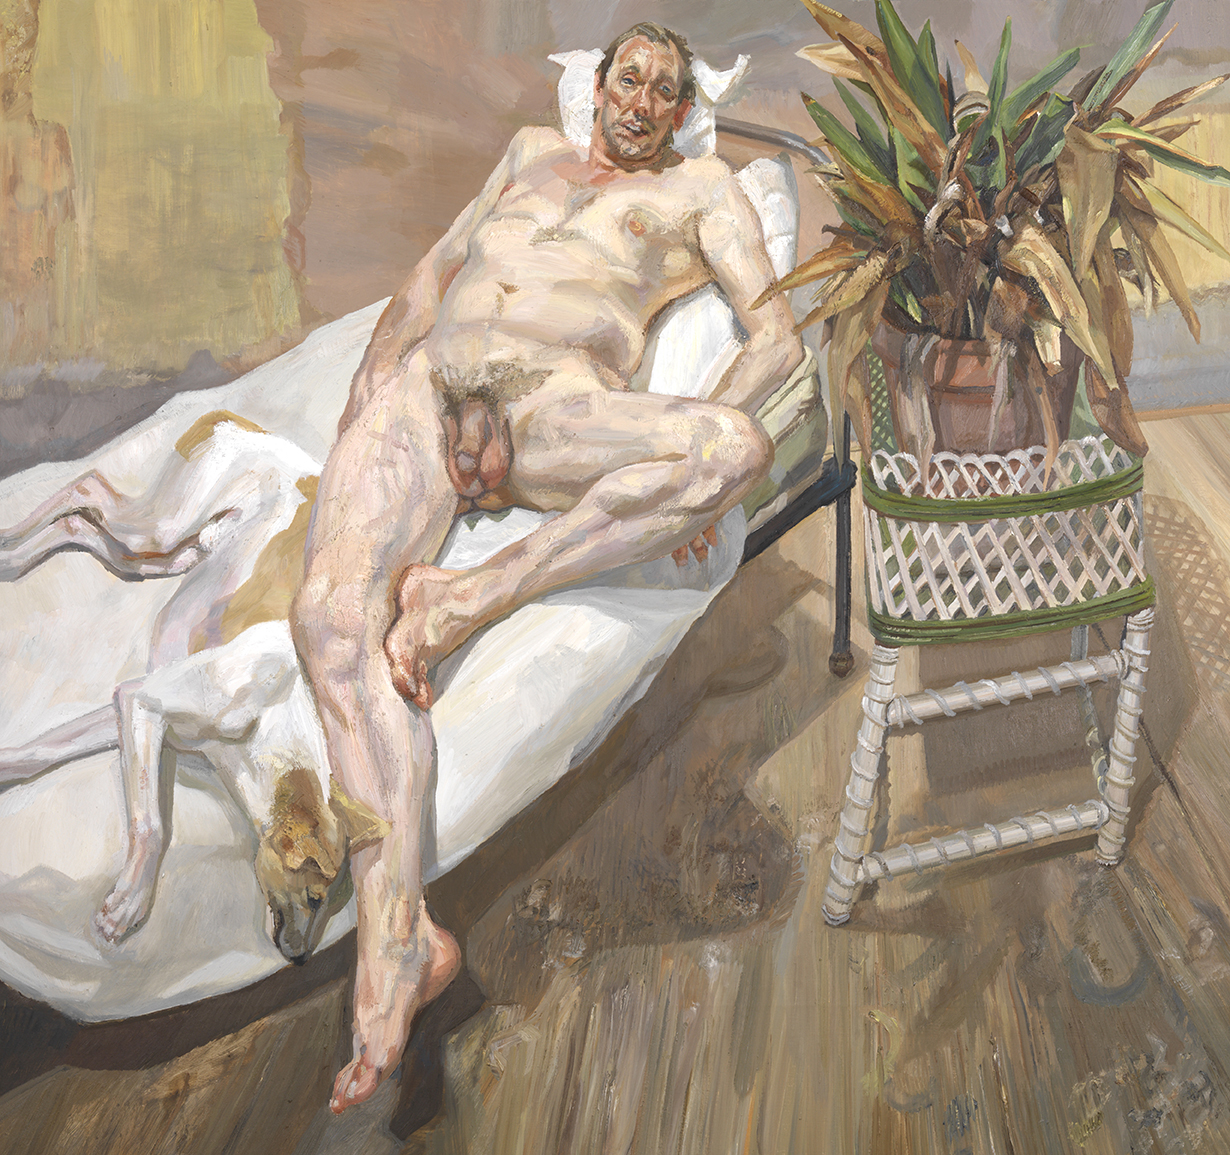 Lucian Freud, David and Eli, 2003-04, Oil paint on canvas, 1626 x 1740 mm. 